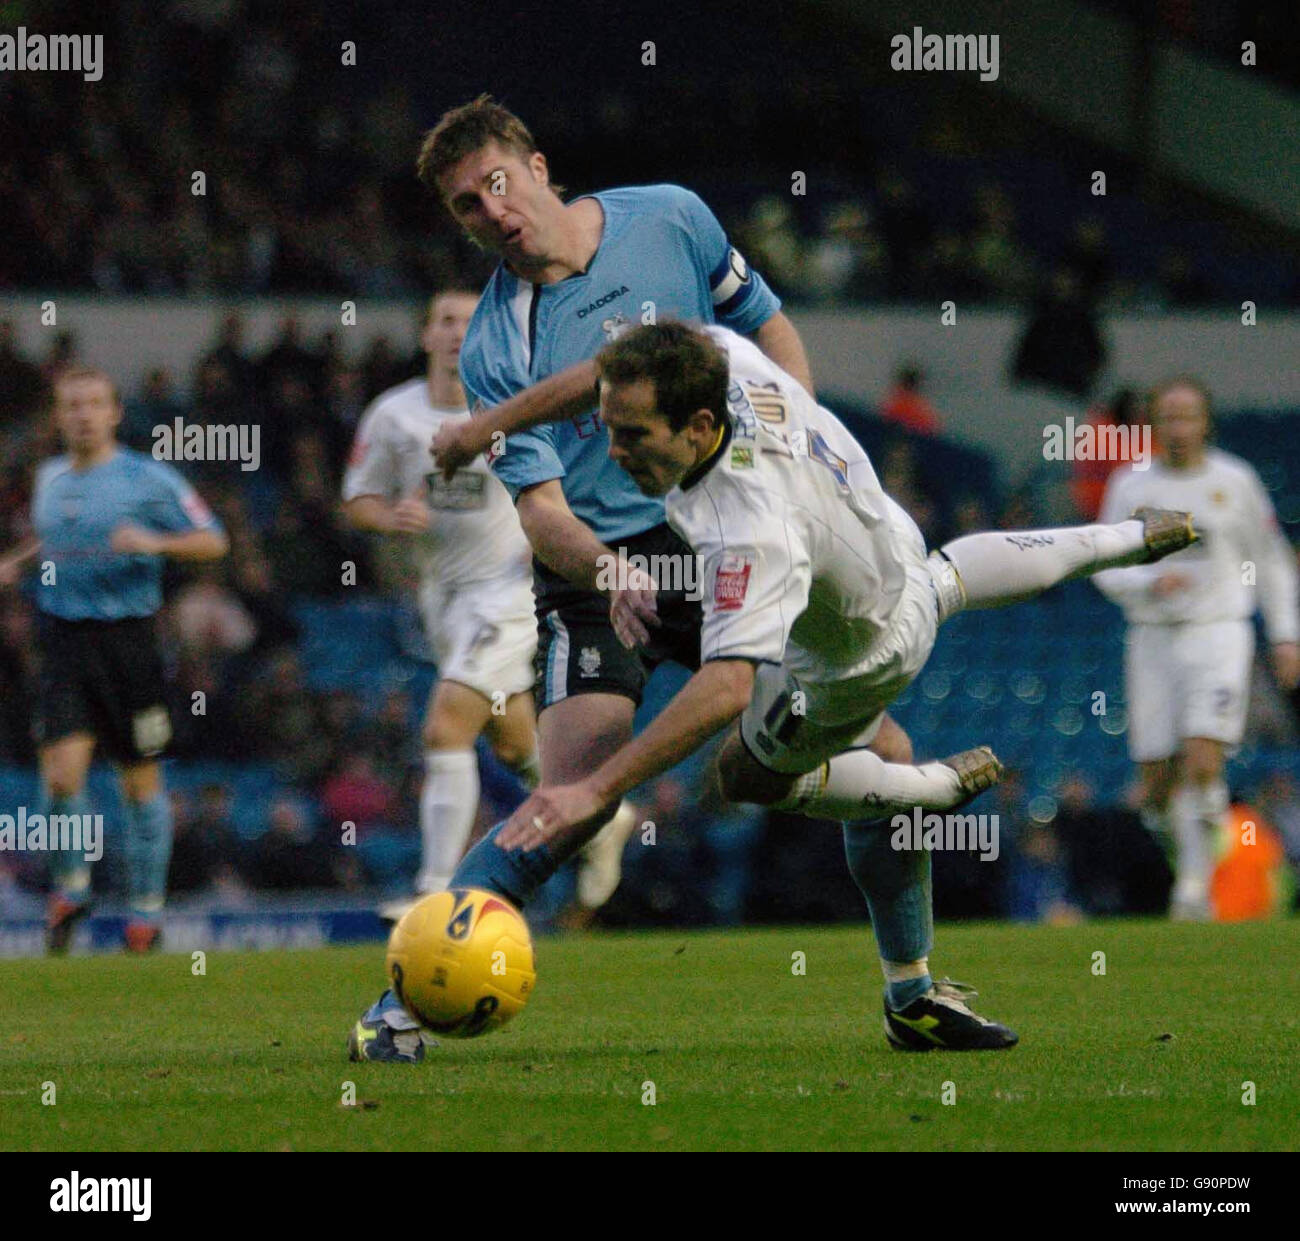 Leeds United's Eddie Lewis (R) falls to the ground following a challenge from Preston's Chris Lucketti, which resulted in a yellow card during the Coca-Cola Championship match at Elland Road, Leeds, Saturday November 5, 2005. Leeds drew 0-0 with Preston. PRESS ASSOCIATION Photo. Photo credit should read: John Jones/PA. NO UNOFFICIAL CLUB WEBSITE USE. Stock Photo